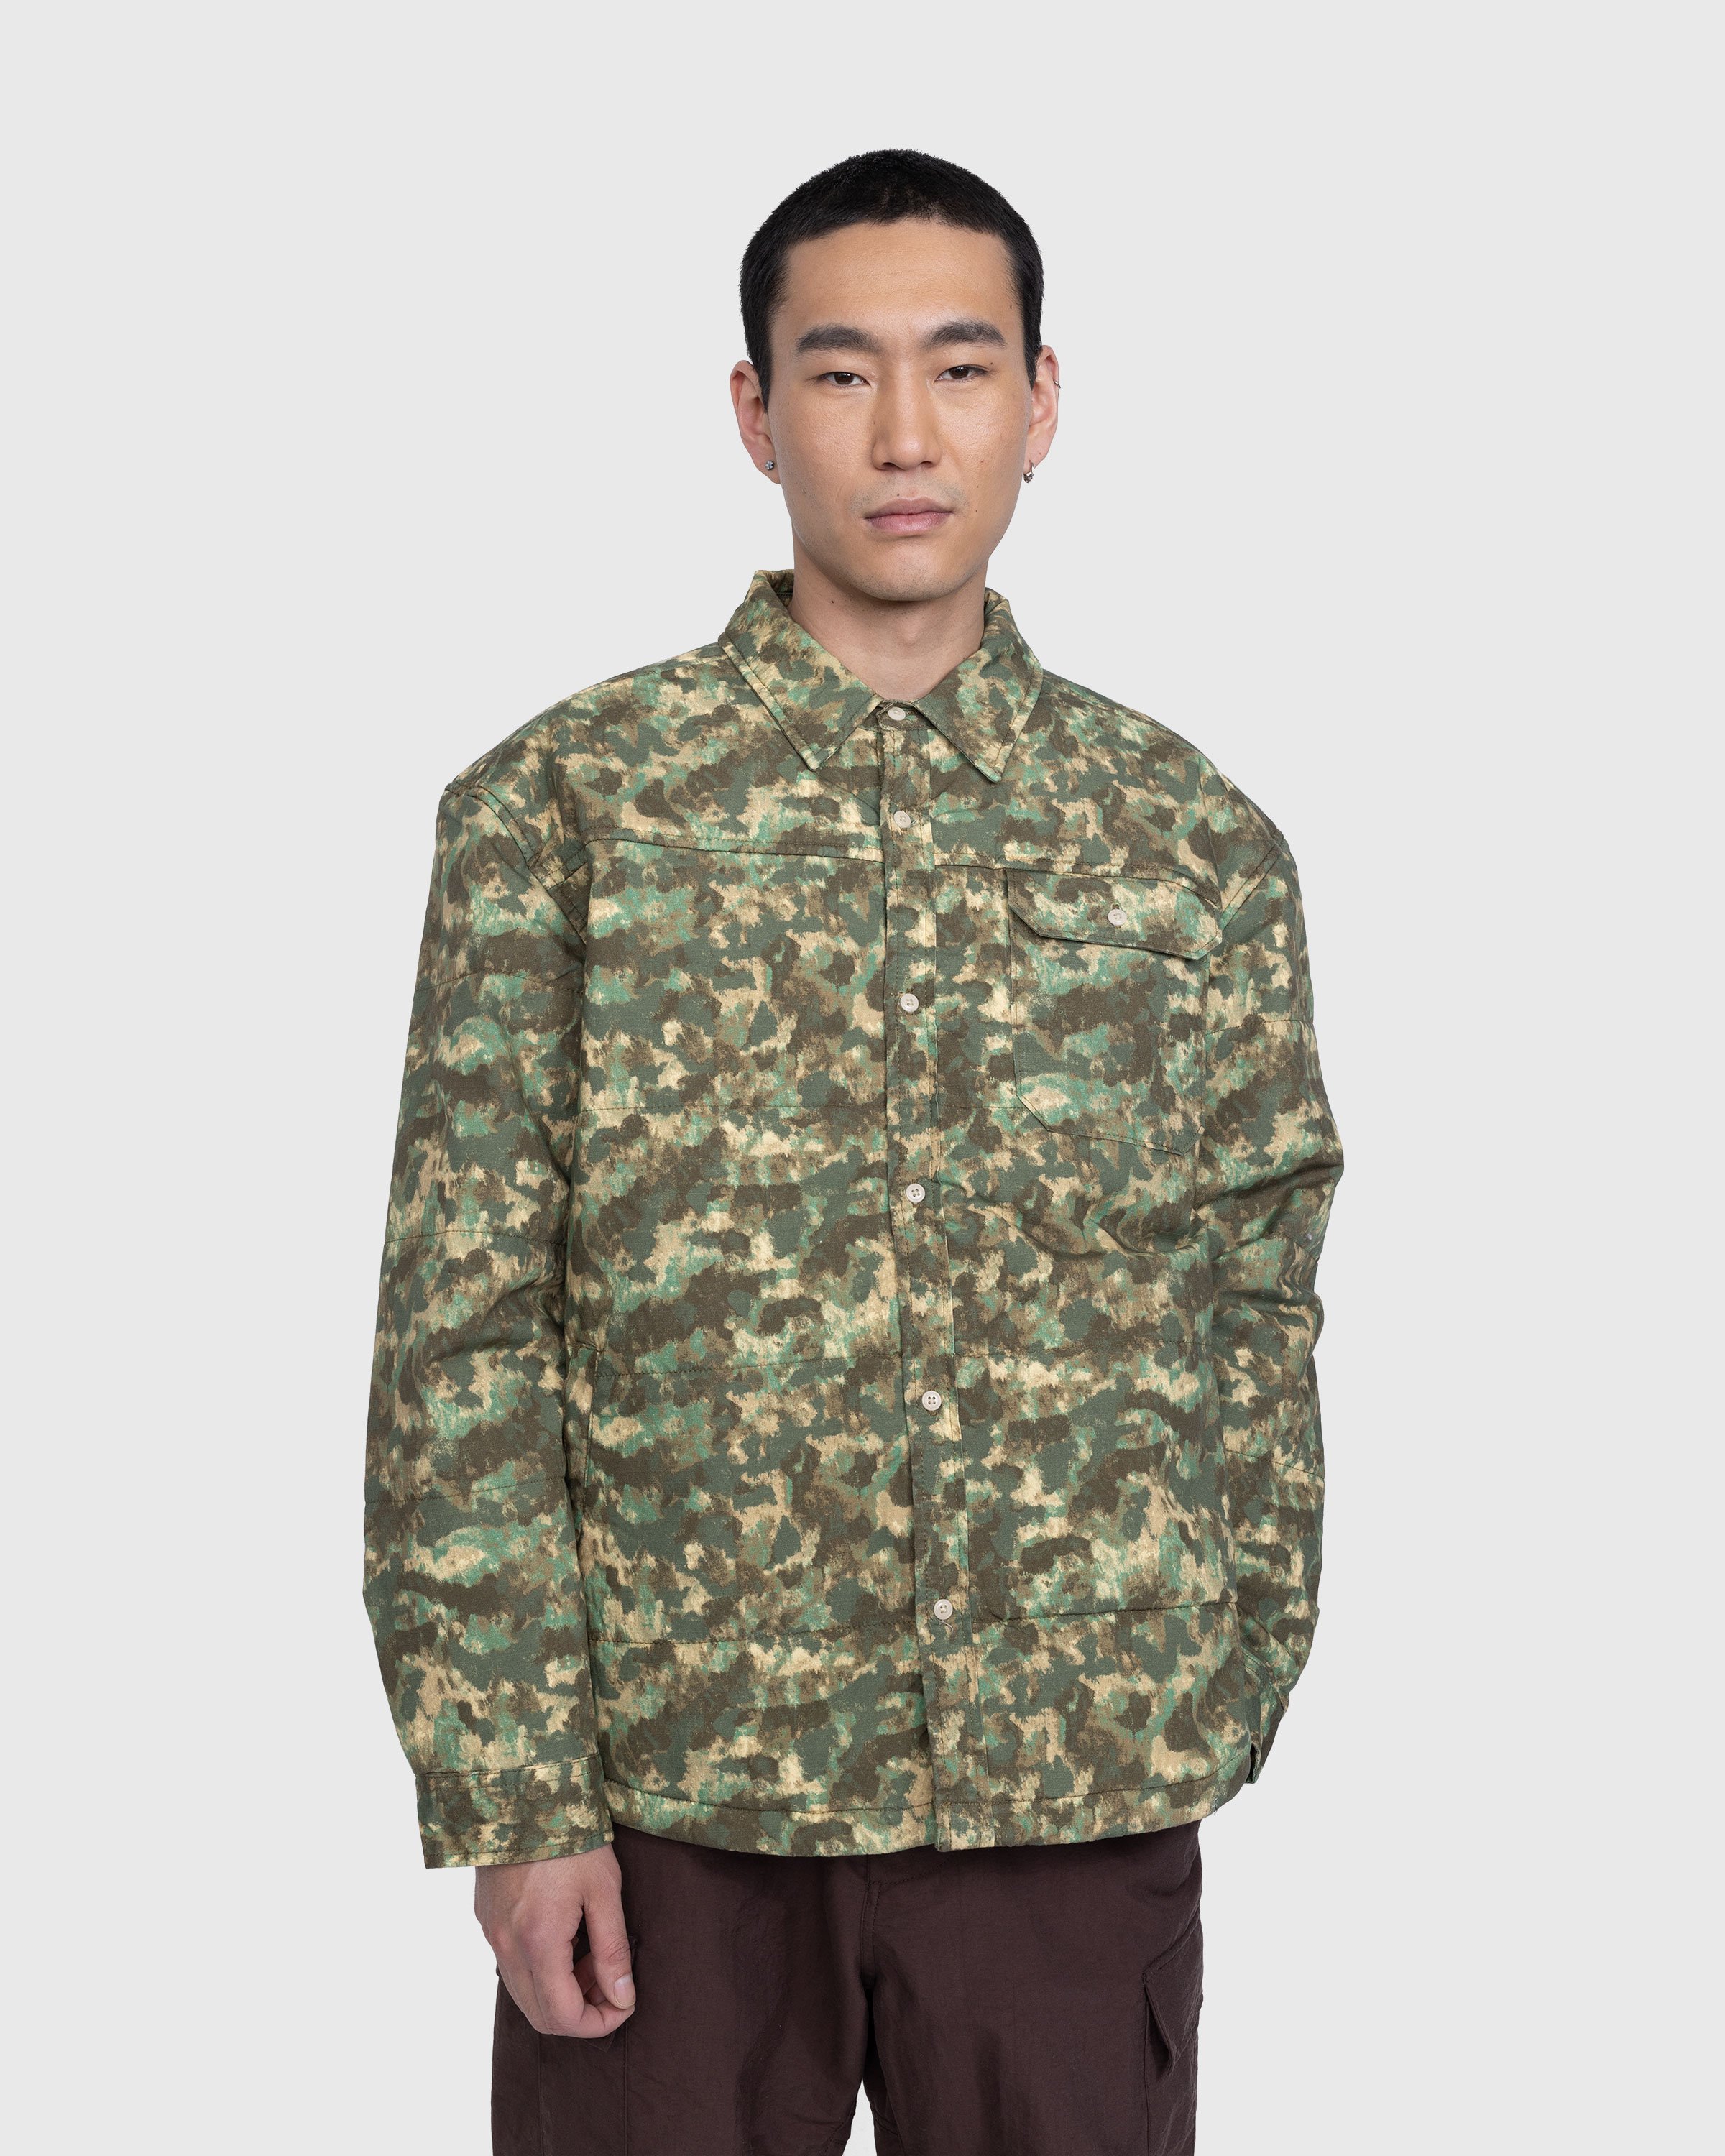 The North Face - M66 Stuffed Shirt Jacket Military Olive/Stippled Camo Print - Clothing - Green - Image 2